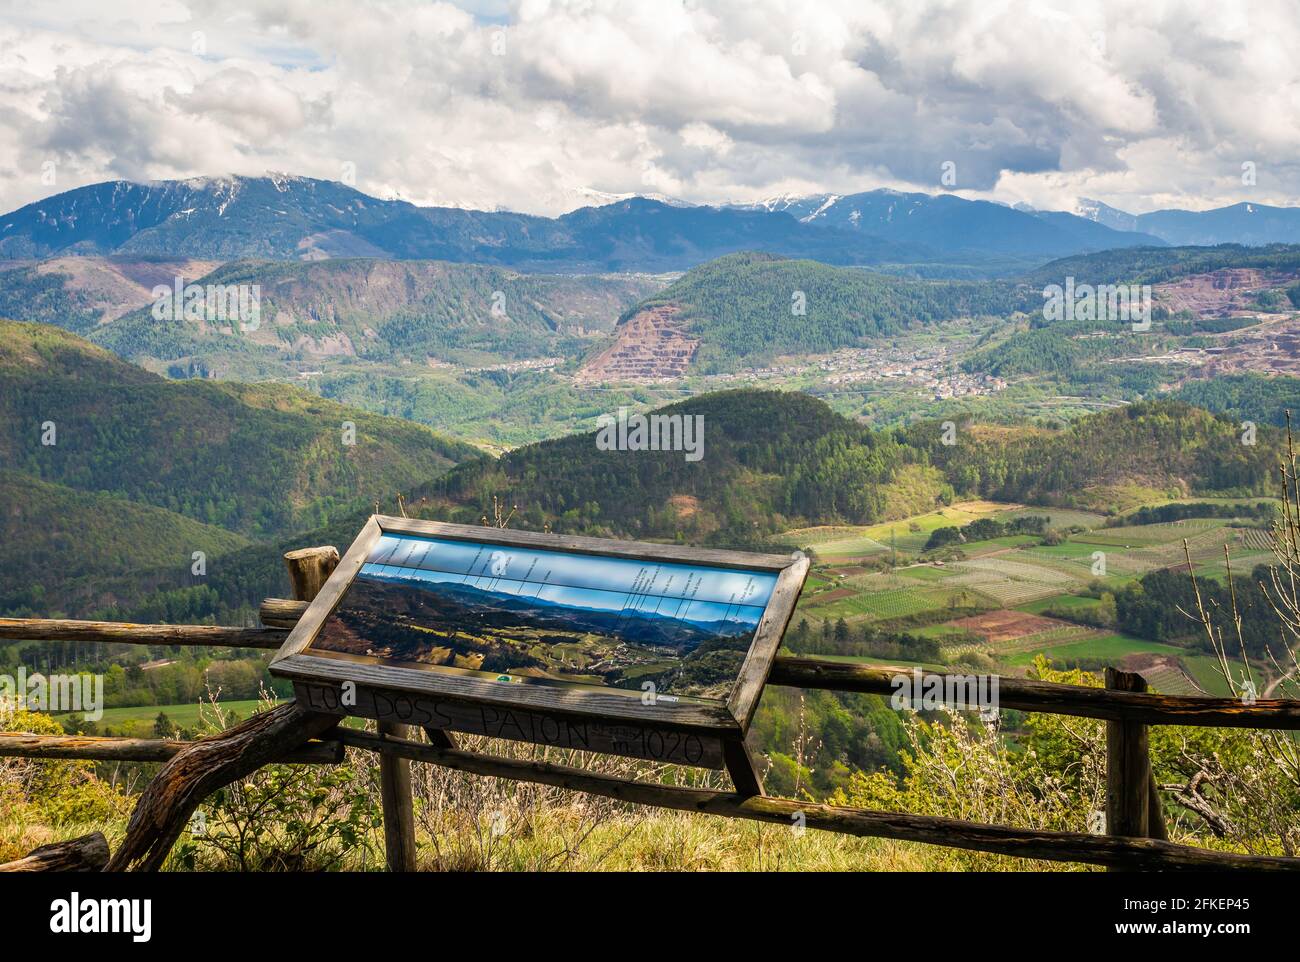 Cembra Valley landscape from Corona Mount in Trentino Alto Adige, northern Italy, Europe. Corona Mount is a 1,035 meter high mountain in the Val di Ce Stock Photo